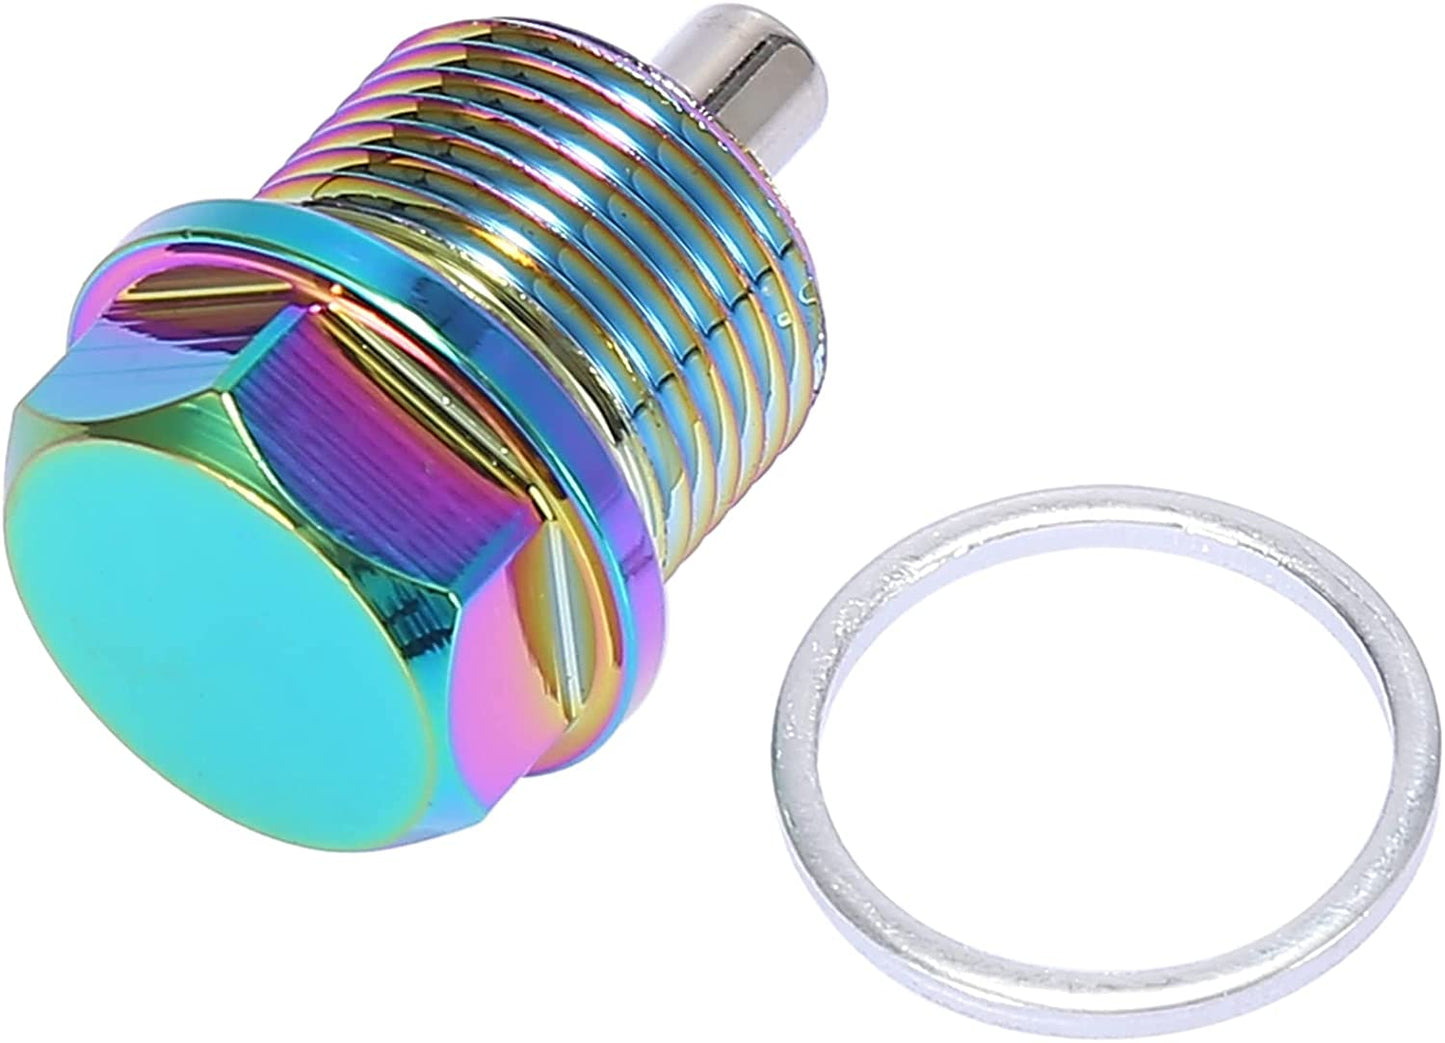 M20-1.5 Multicolor Magnetic Oil Drain Plug with Gaskets for Universal Car